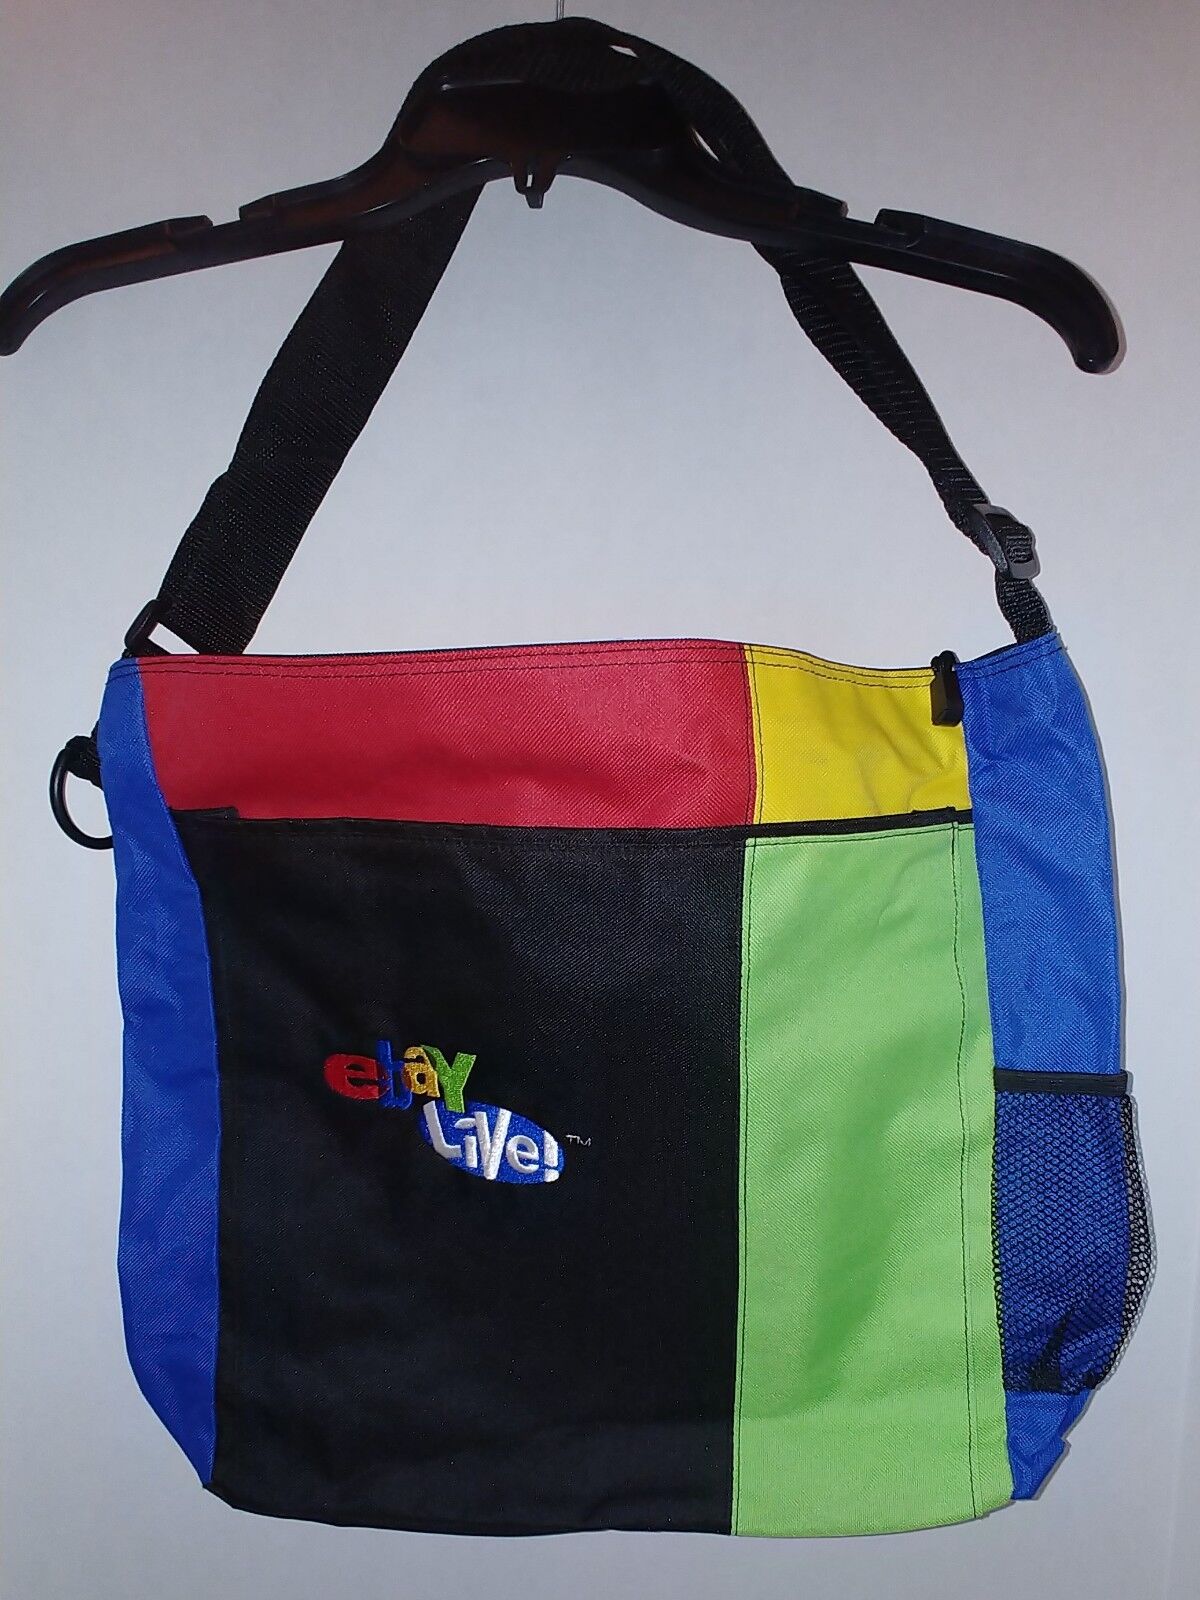 RARE Colorful Hard to Find Fabric Tote Bag  from eBay Live 2007 Convention New